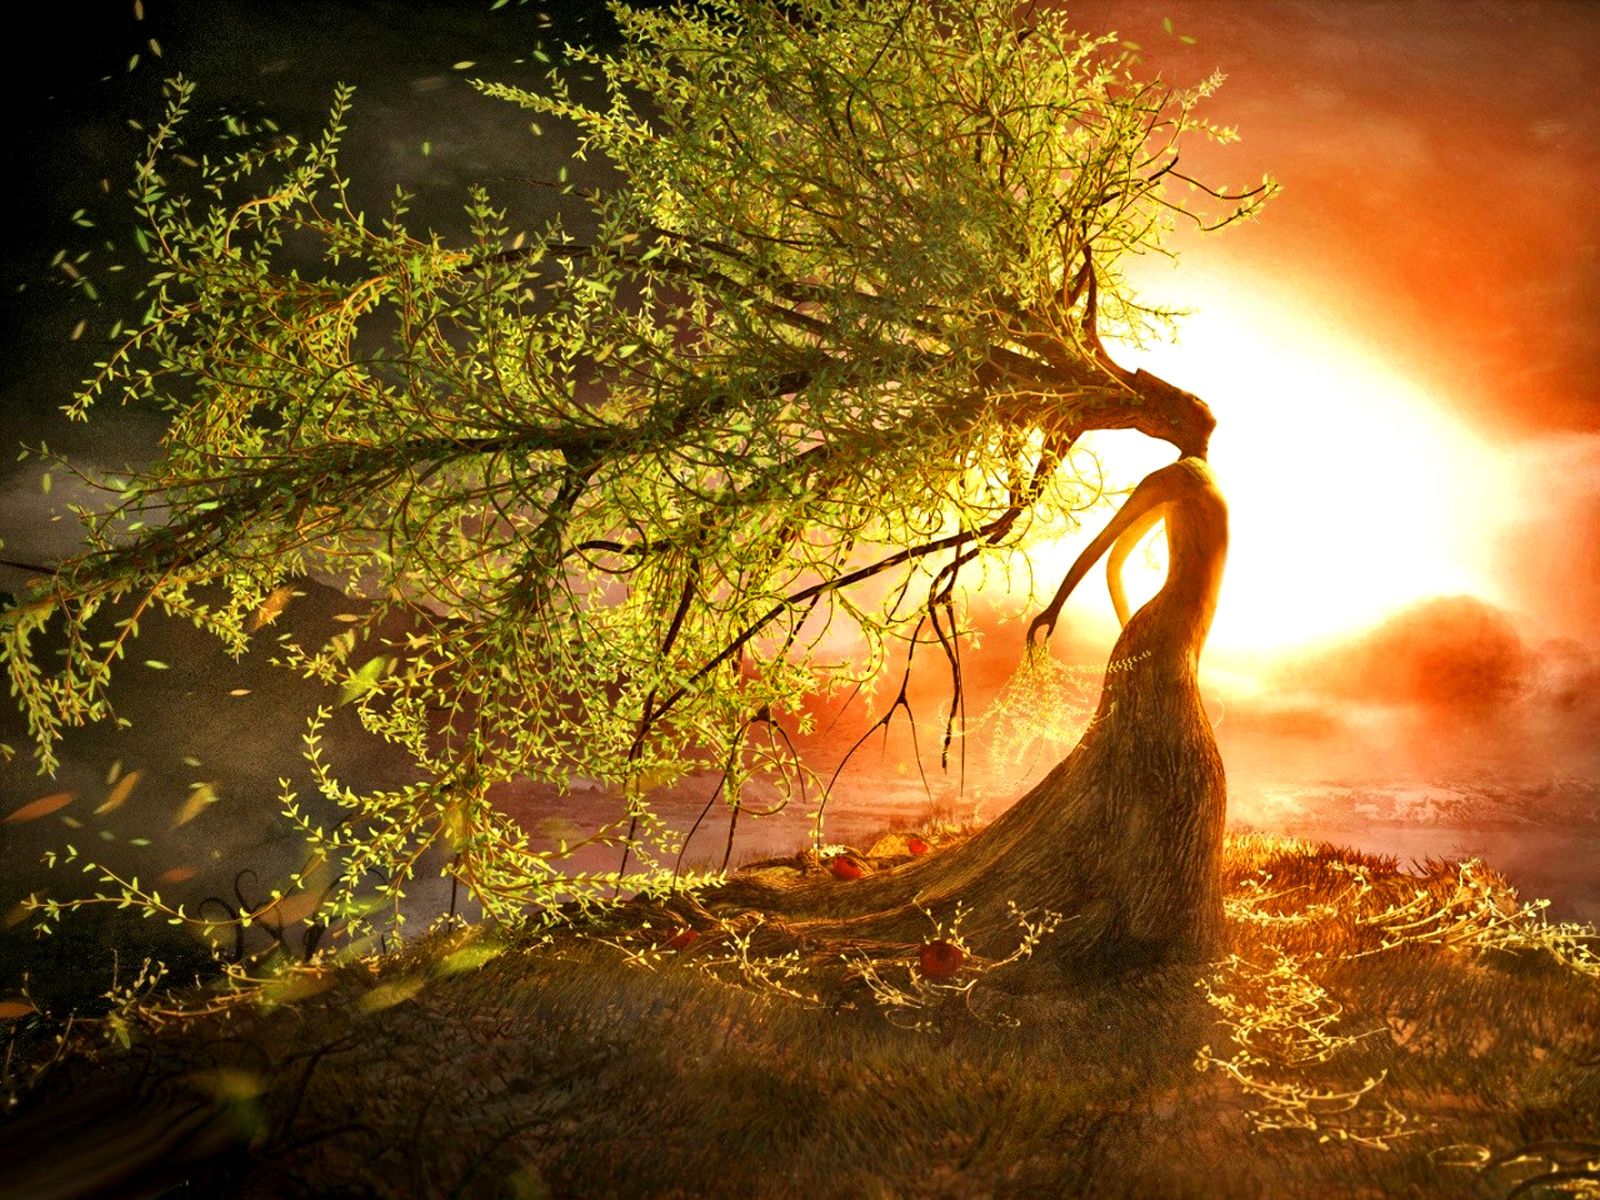 The Summer Is Here: The Spiritual Meaning Behind Today's Summer Solstice, June 21st